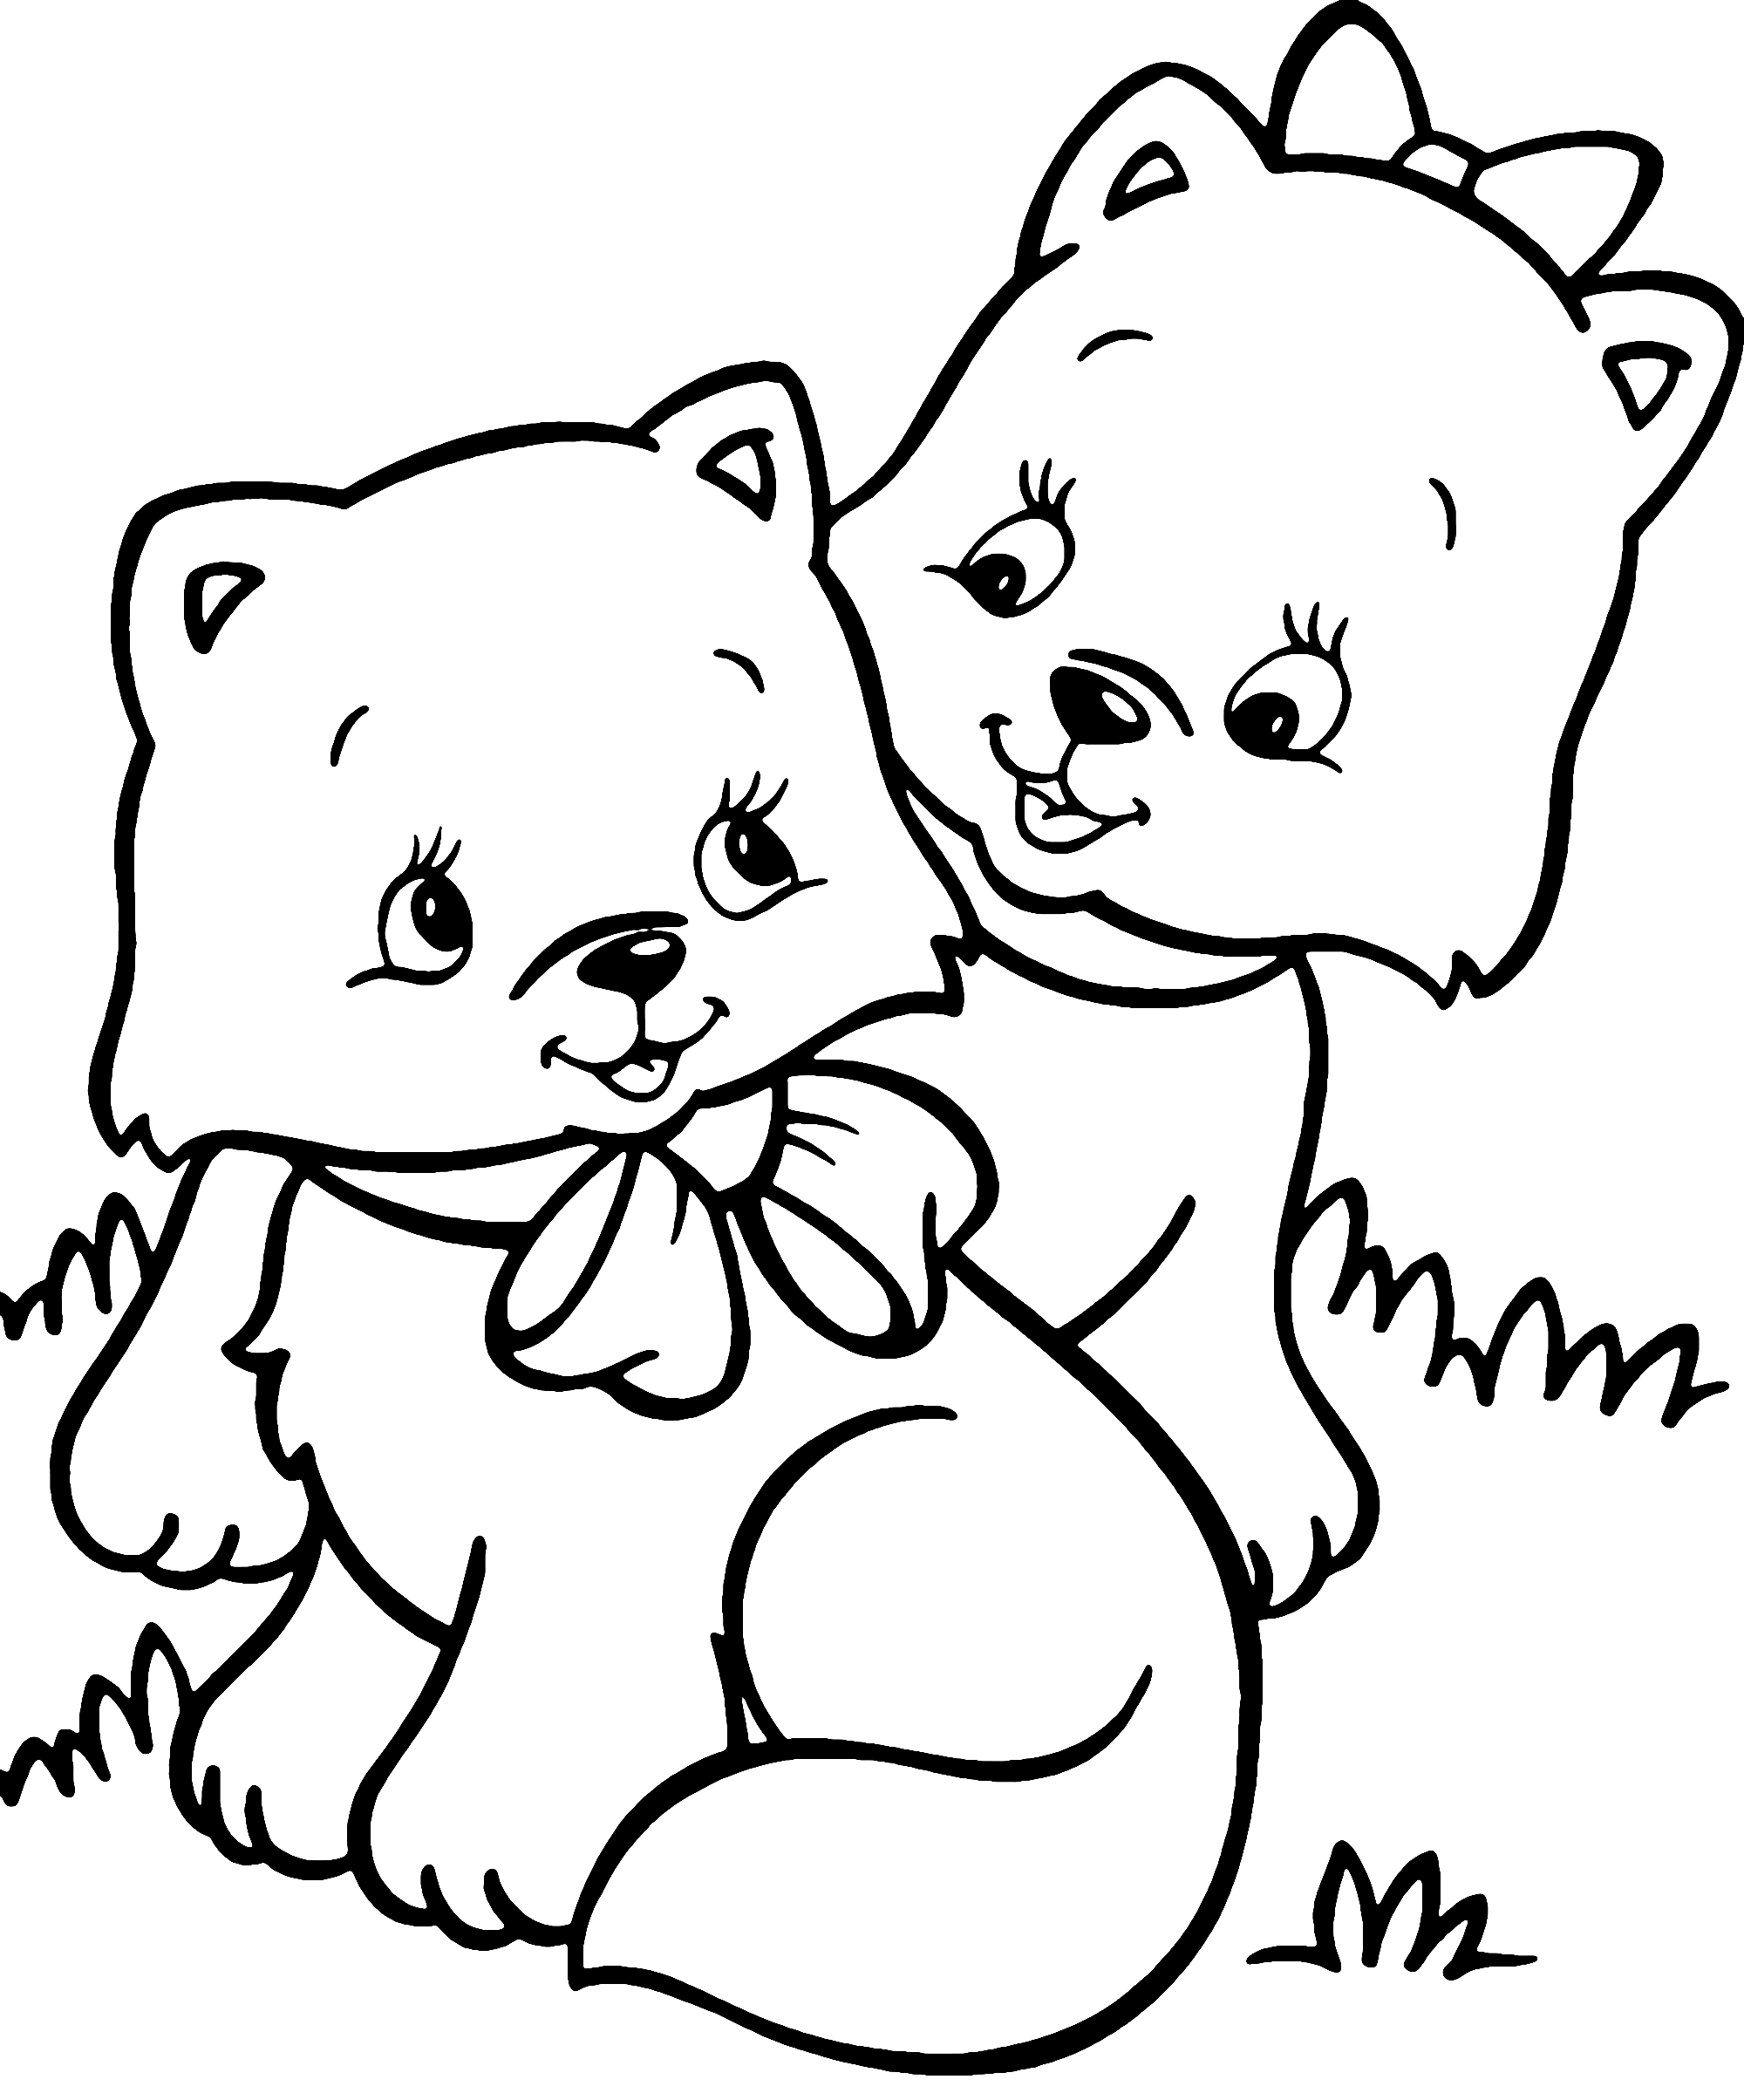 Two Cute Kittens Cat Coloring Page for Kids